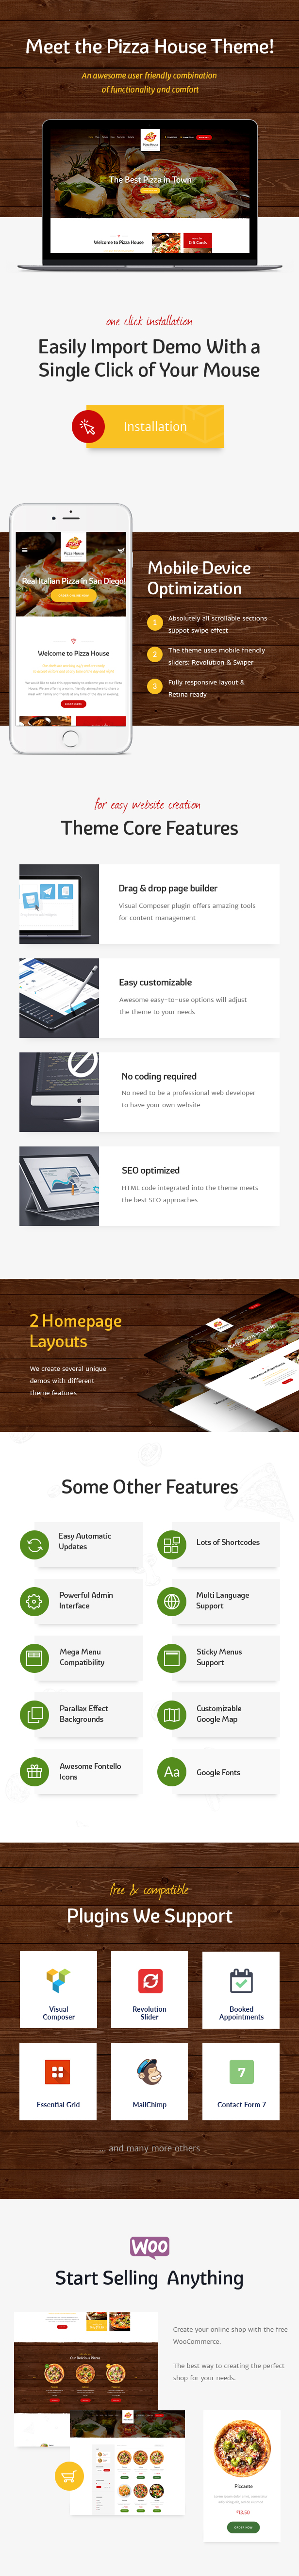 Image of restaurant-themed website pages.